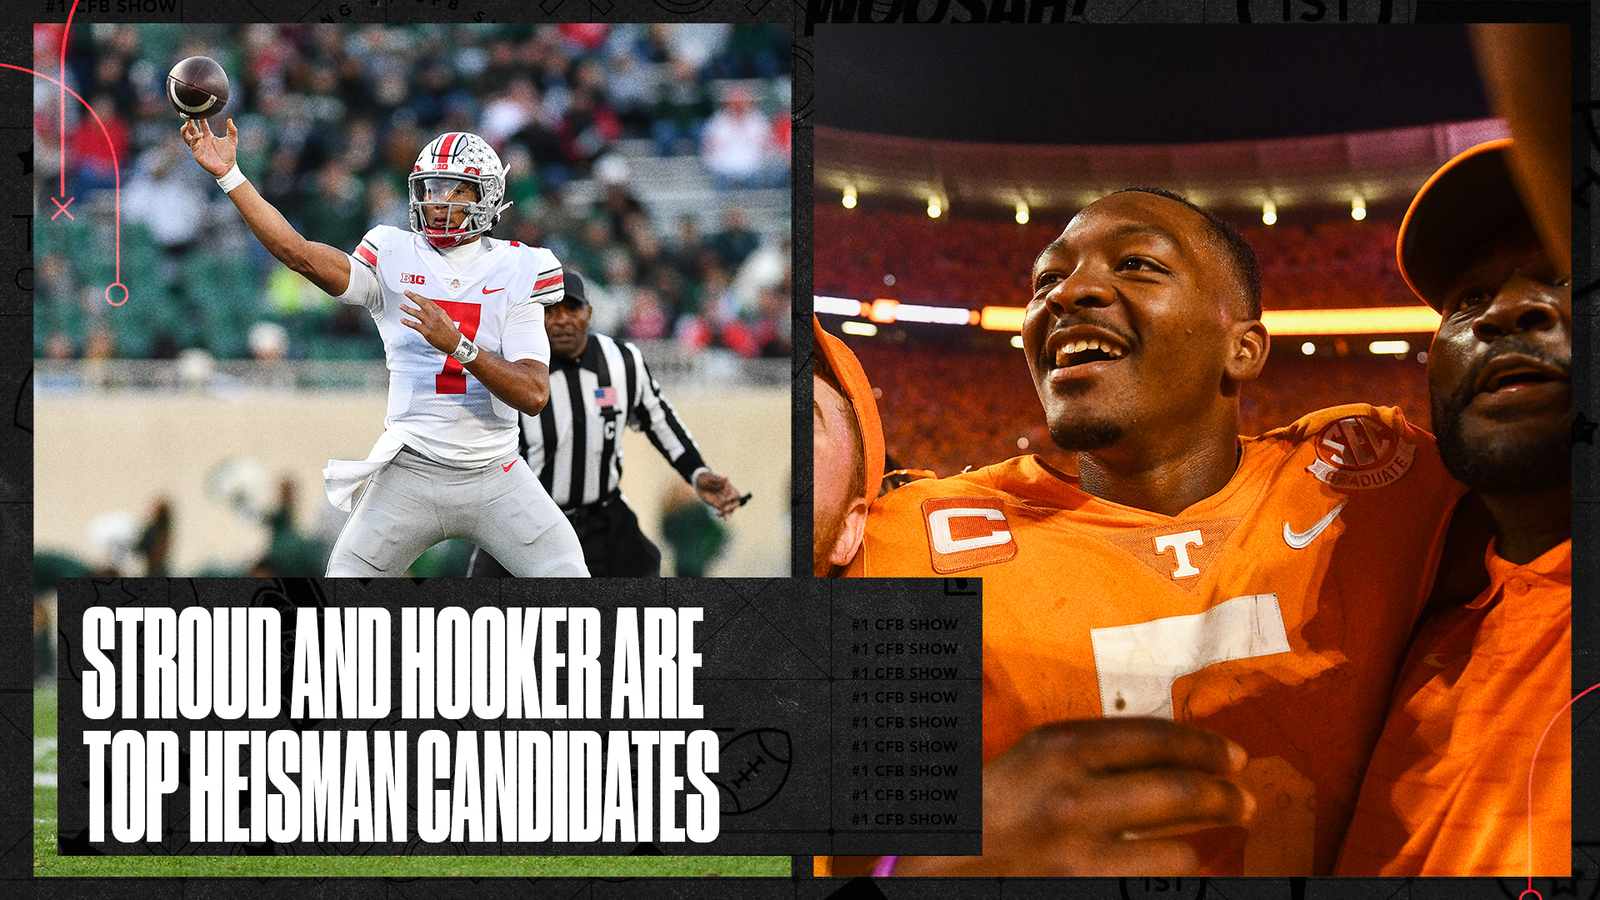 Ohio State's C.J. Stroud & Tennessee's Hendon Hooker are the top Heisman candidates